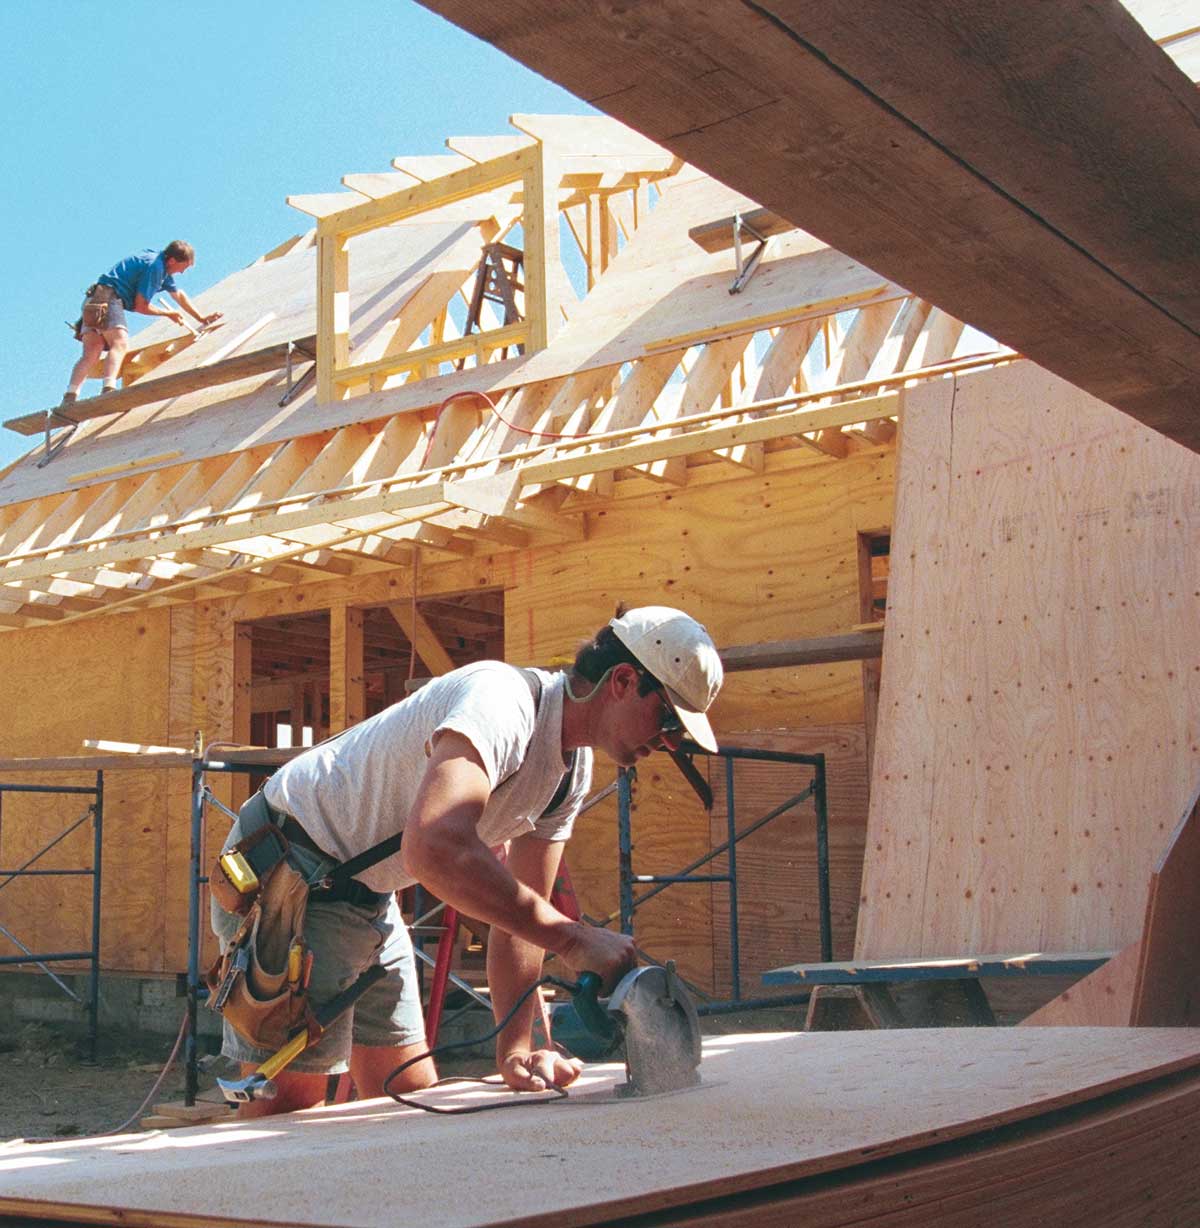 Cutting on the ground is safer and quicker. Crew members on the roof do the nailing while a designated cutter prepares the sheathing on the ground. The cutter can also keep track of templates and scrap pieces to use the sheets more efficiently.